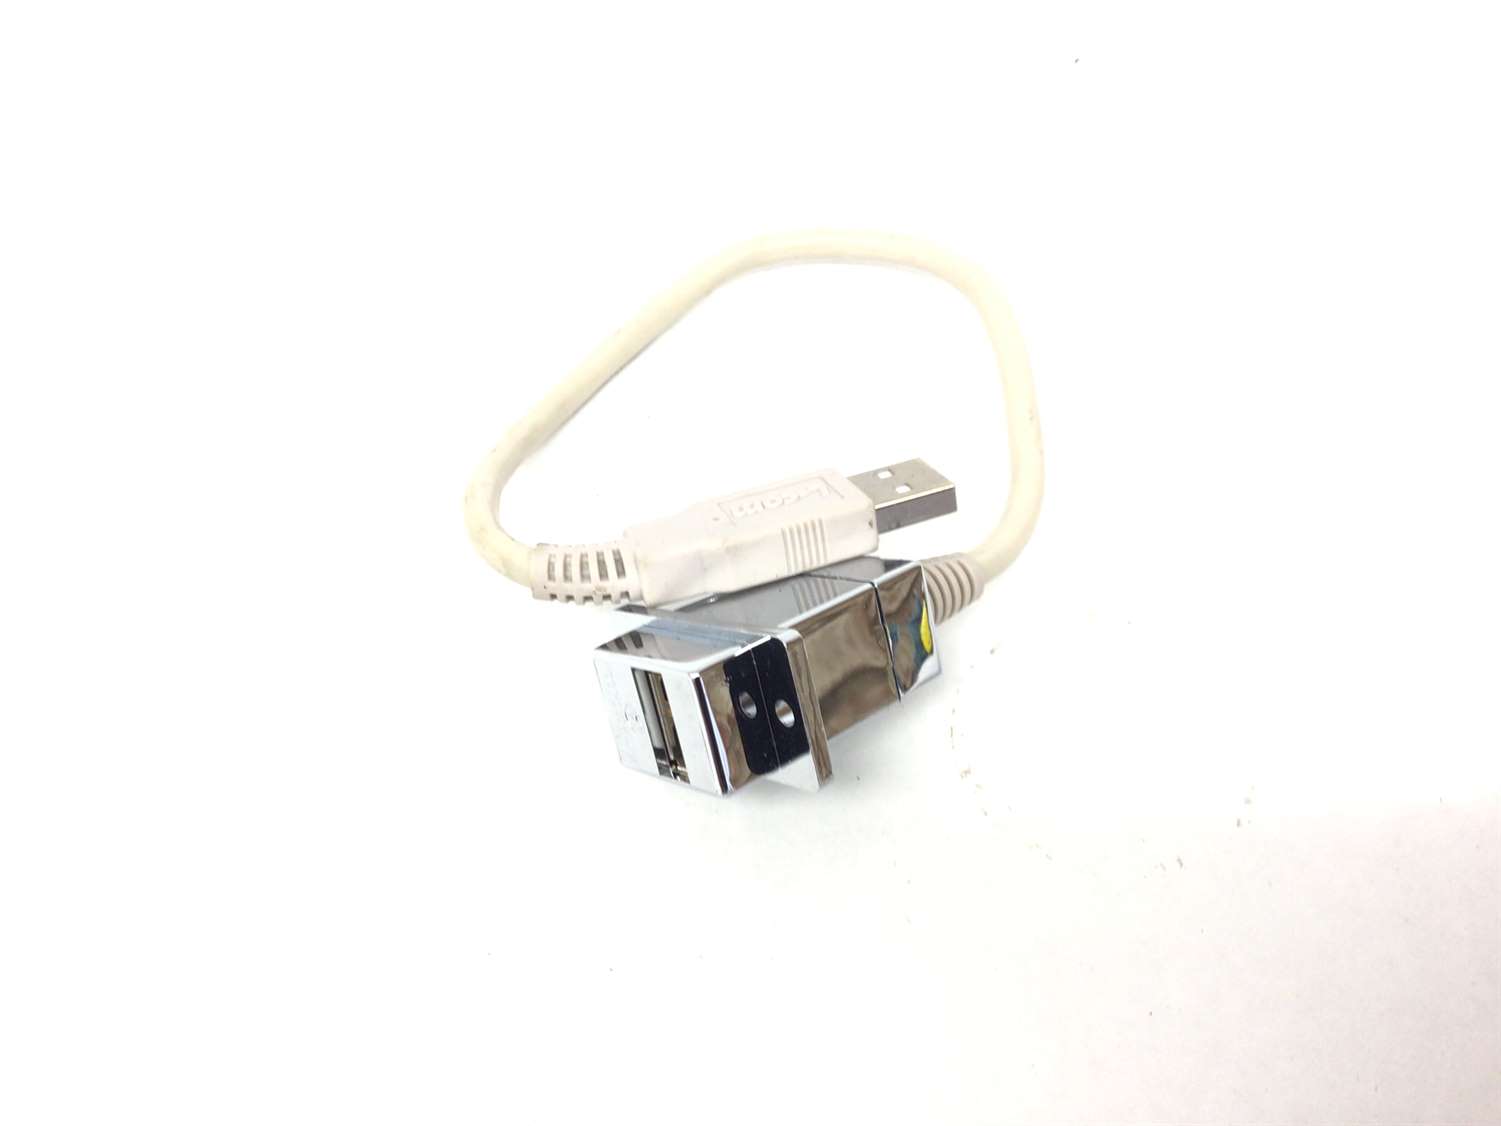 L Comm RJ45 To USB Connector Cable (Used)